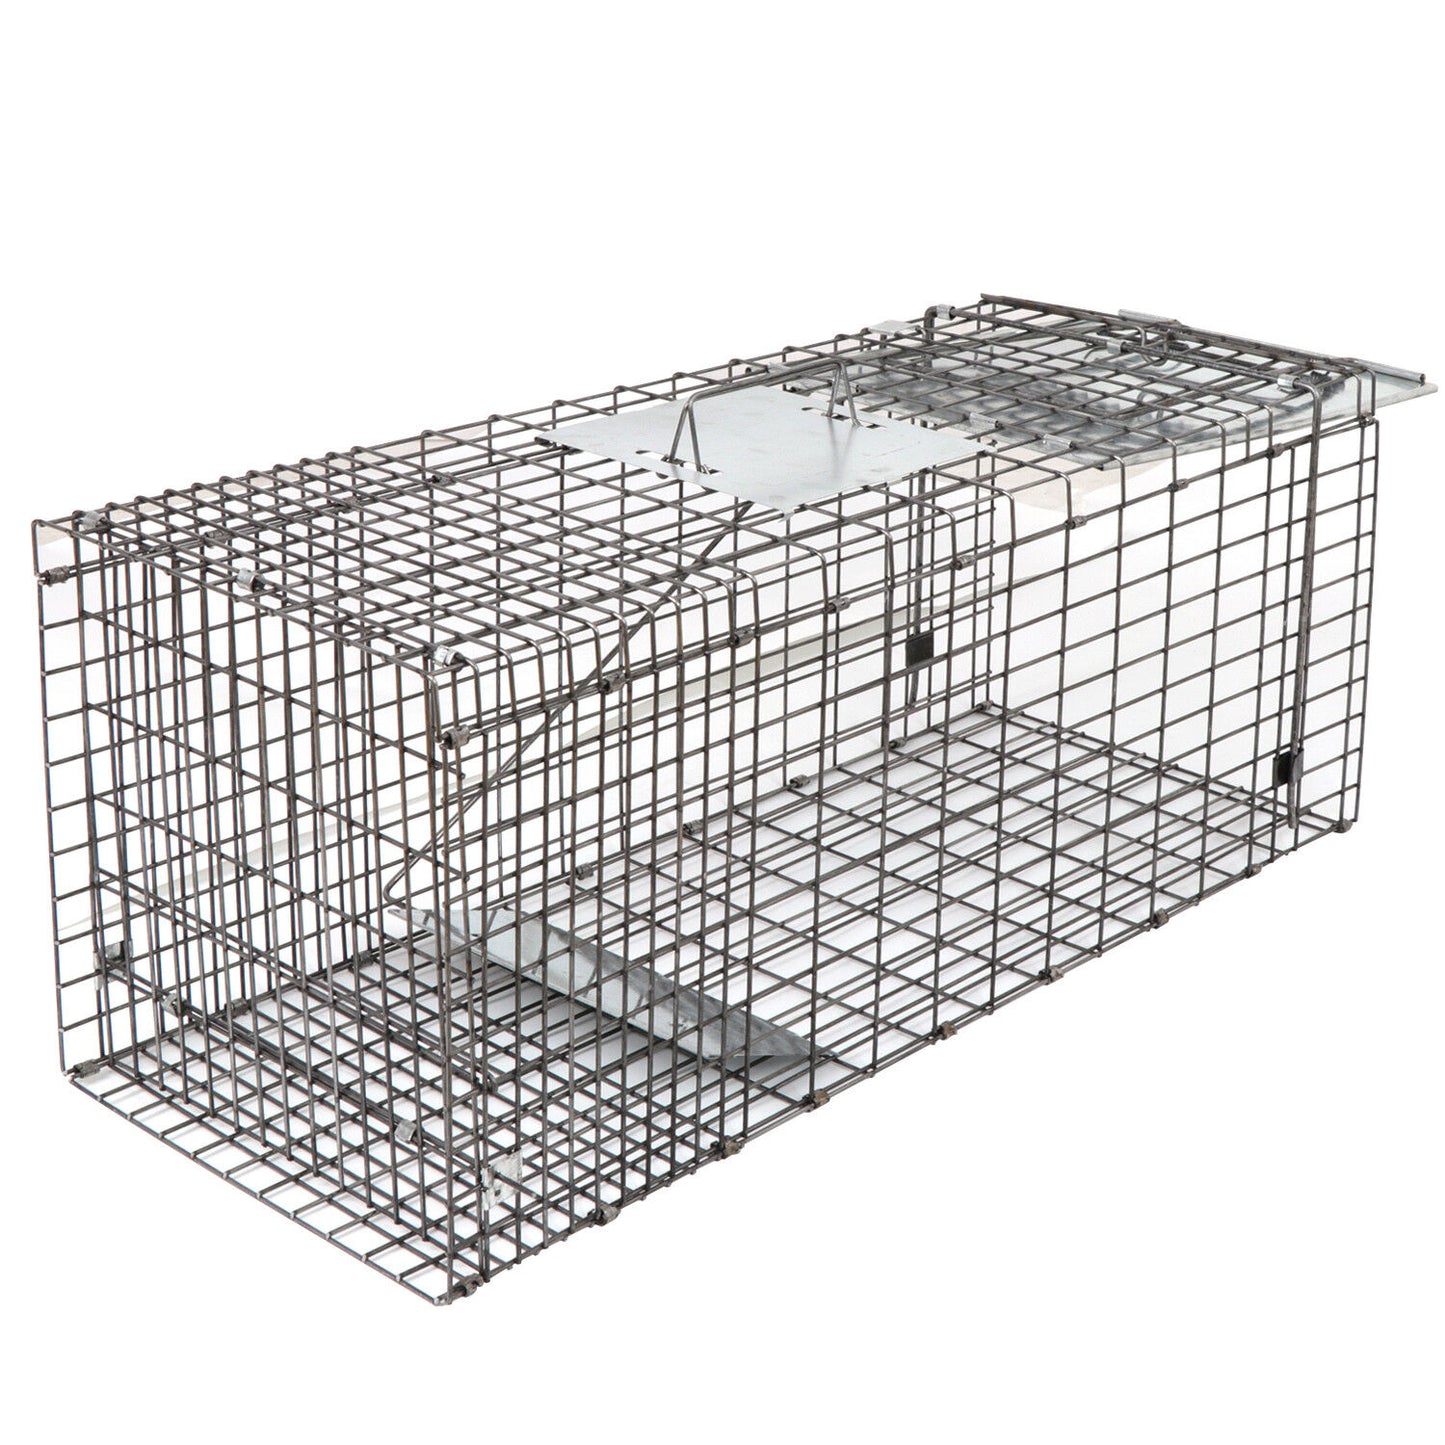 32" Humane Animal Trap Steel Cage for Live Rodent Control Rat Squirrel Raccon